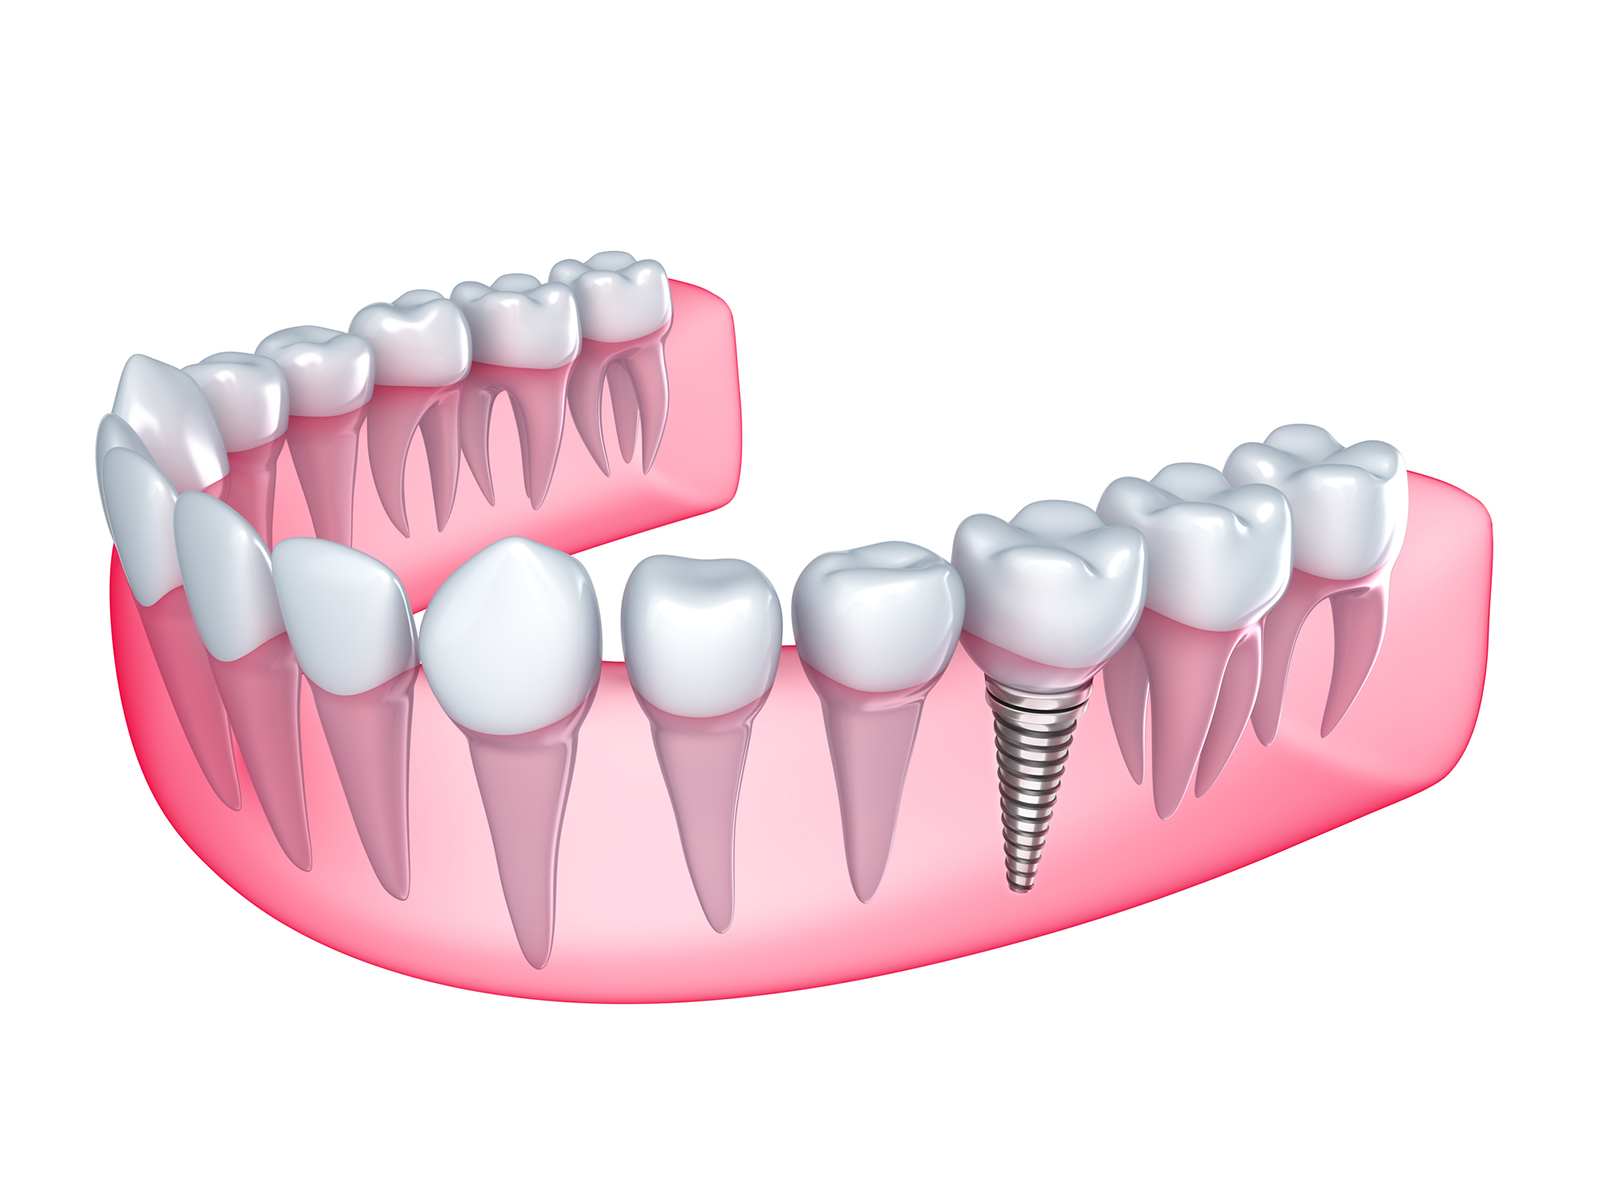 How much do dental implants cost?